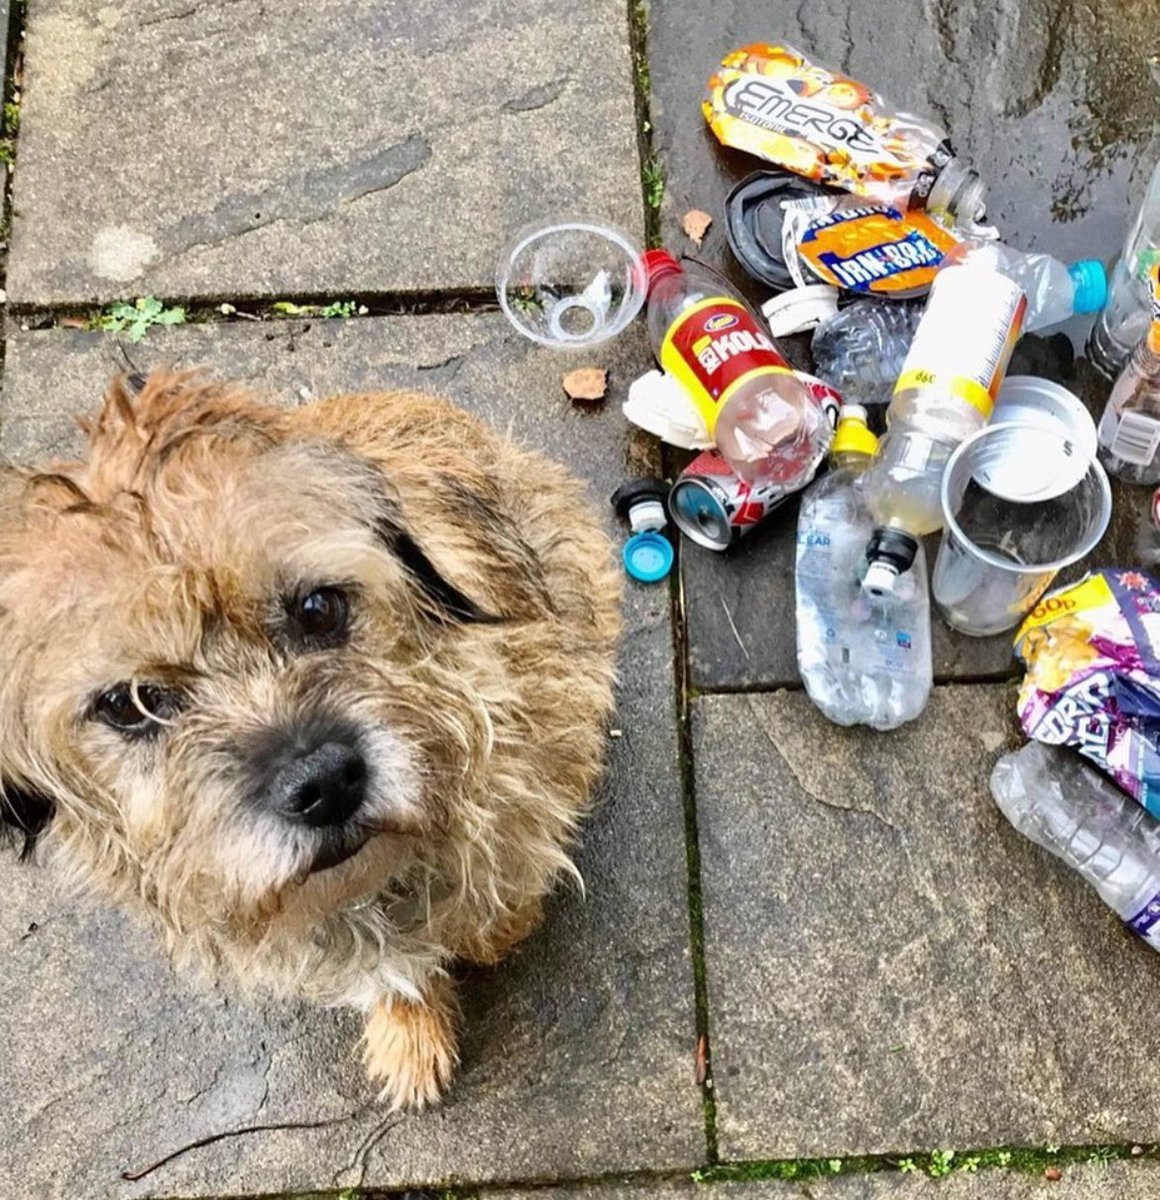 Wherever you roam, pick up a few pieces of #litter. So simple, so effective. 25,000 AMAZING dog owners removing over 36 million bits of litter every year. Great for #mentalhealth & positivity taking a simple action that protects animals. #btposse #dogowners #sundayvibes